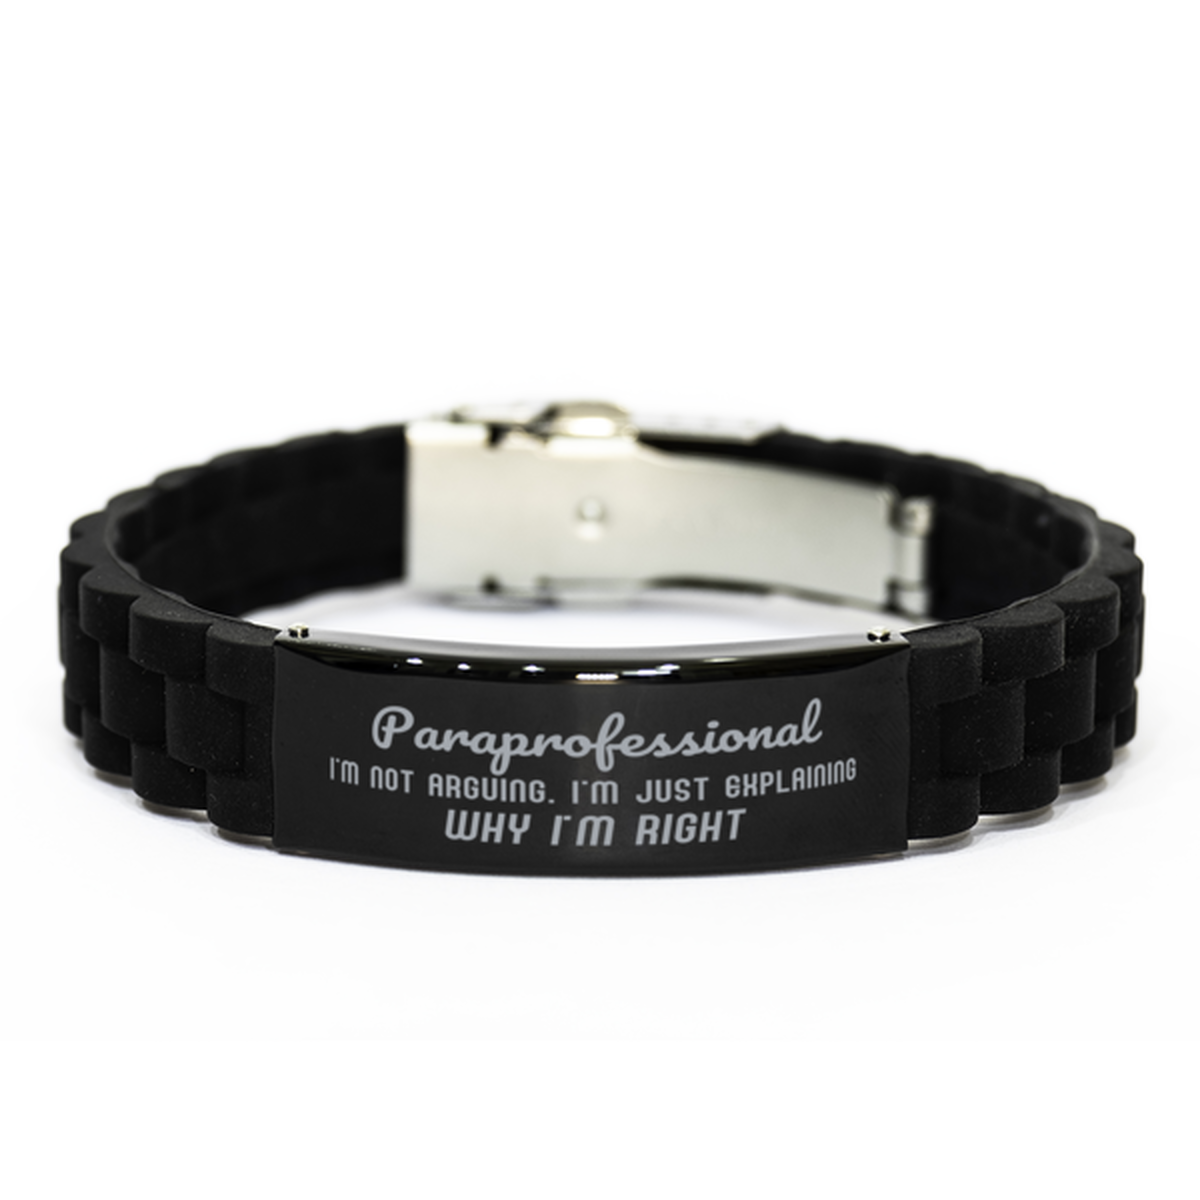 Paraprofessional I'm not Arguing. I'm Just Explaining Why I'm RIGHT Black Glidelock Clasp Bracelet, Funny Saying Quote Paraprofessional Gifts For Paraprofessional Graduation Birthday Christmas Gifts for Men Women Coworker